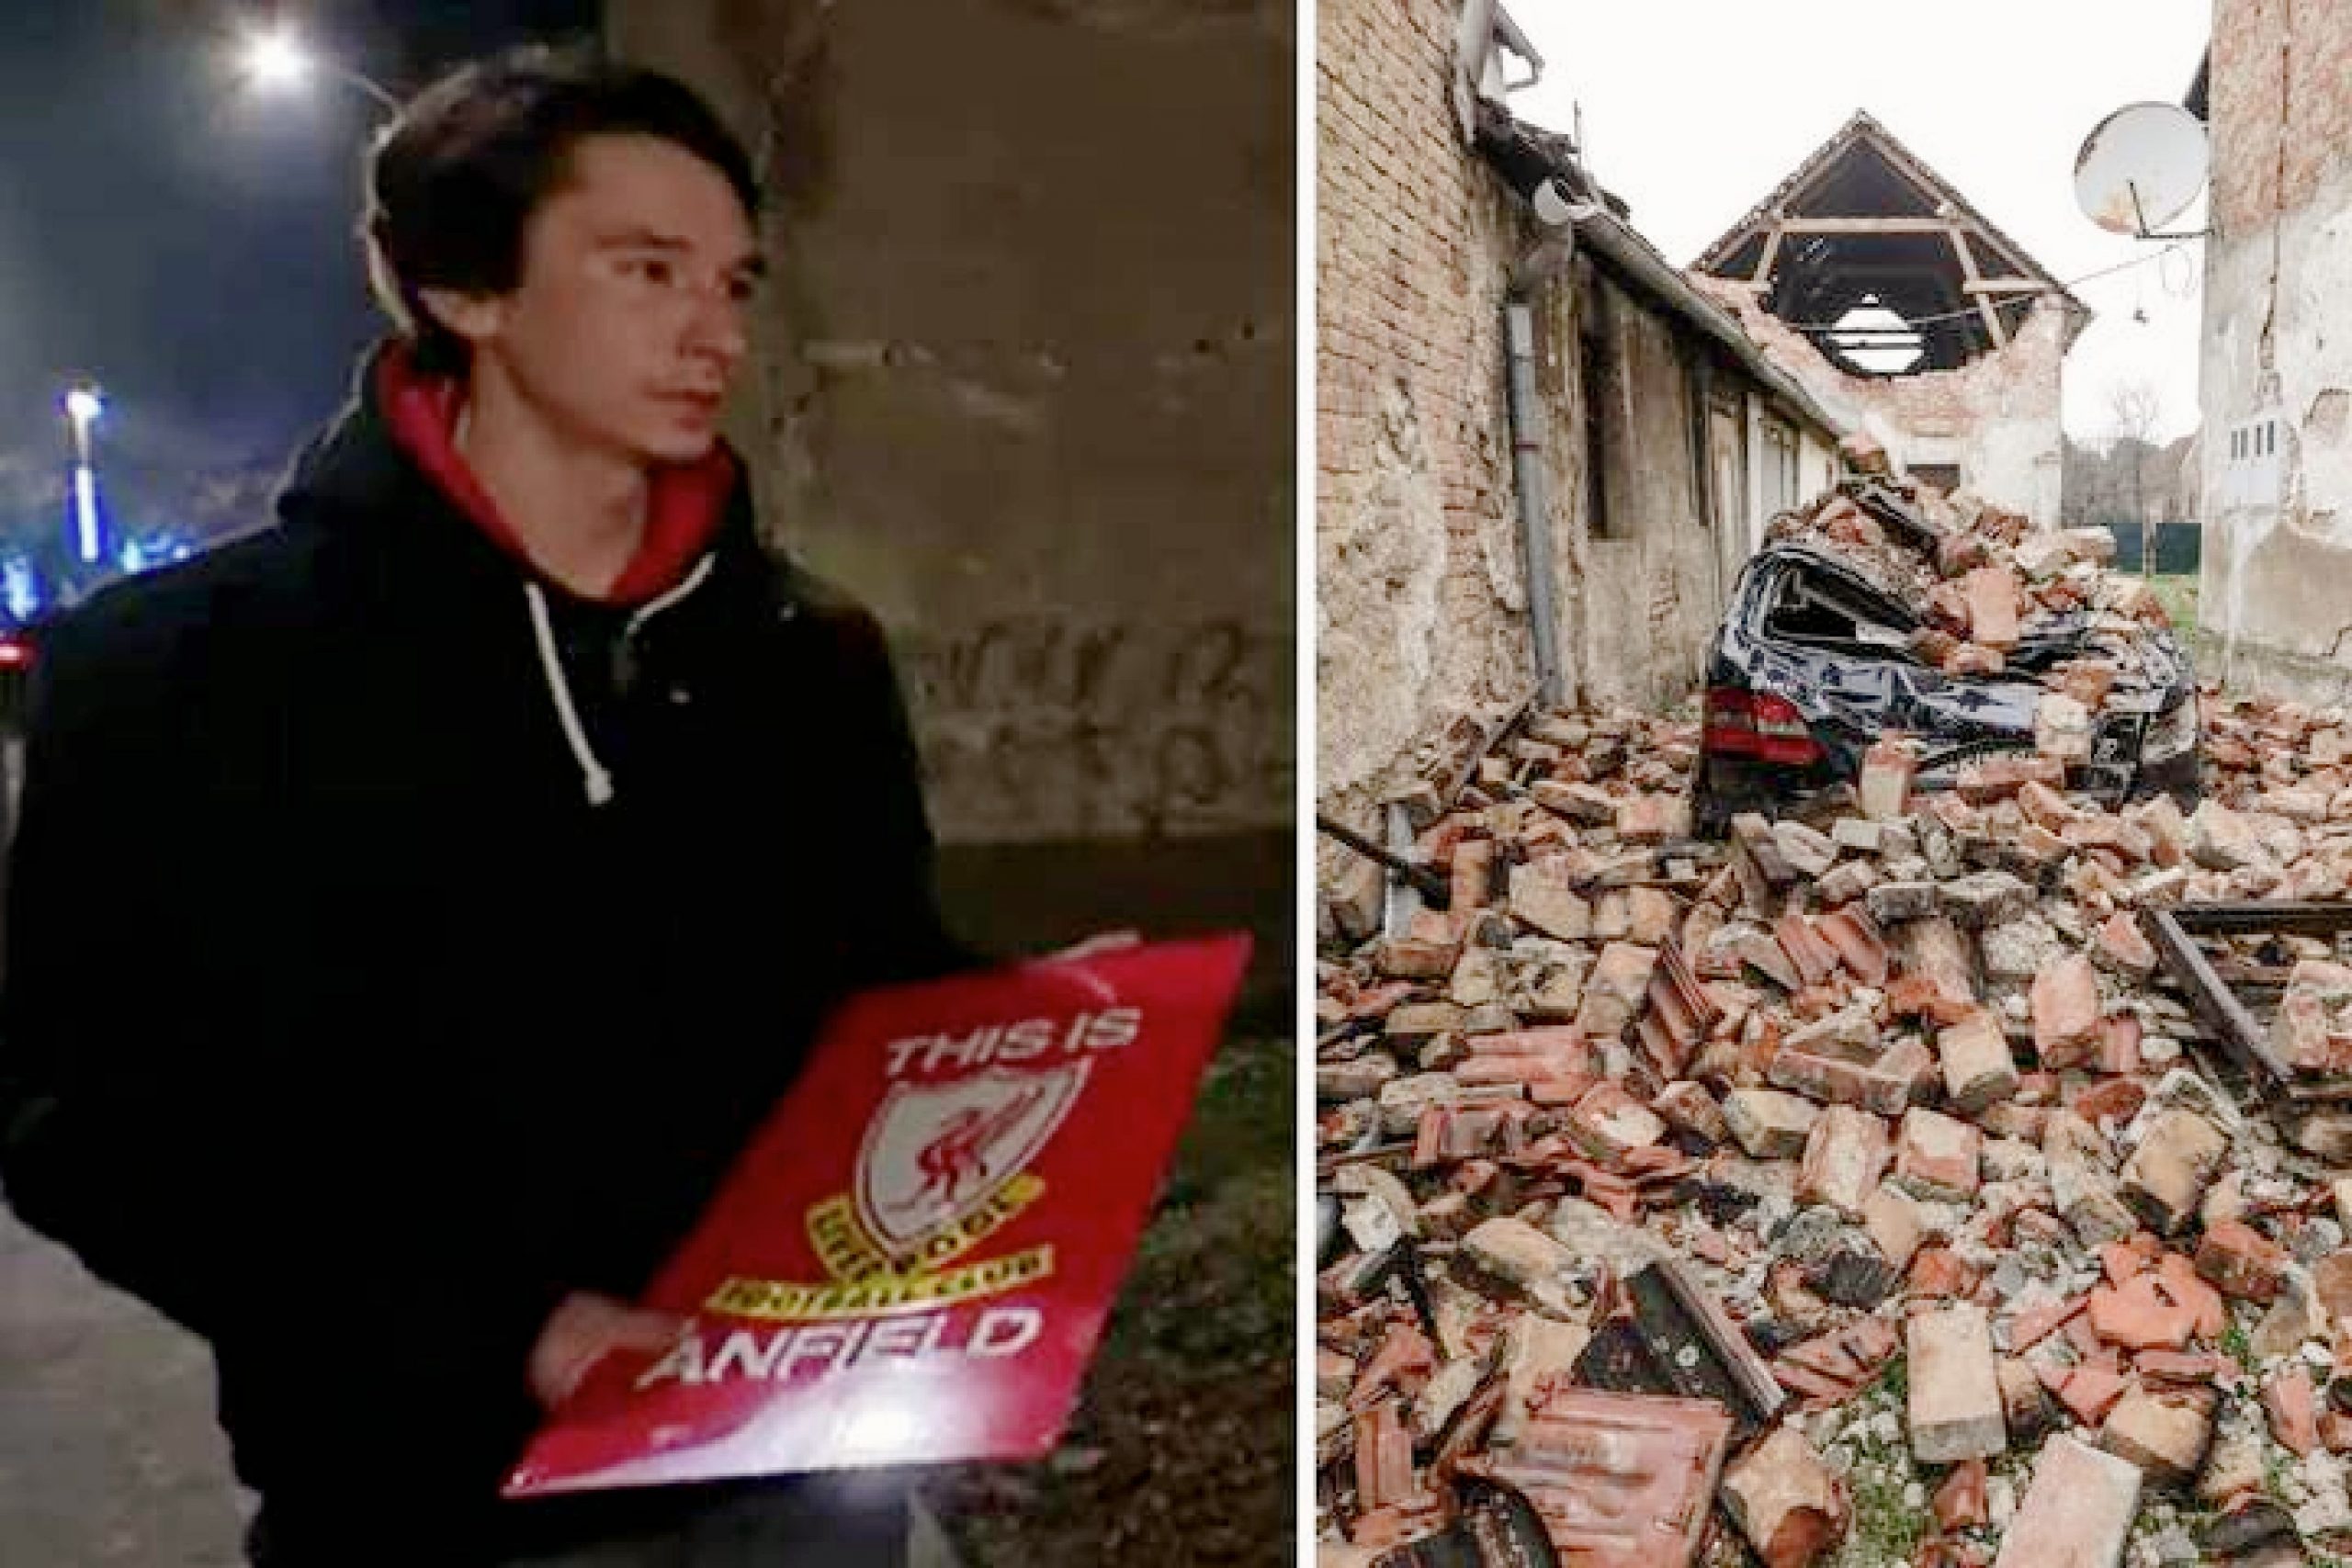 This story of a Liverpool fan who lost his home in the Croatian earthquake shows football is more than life